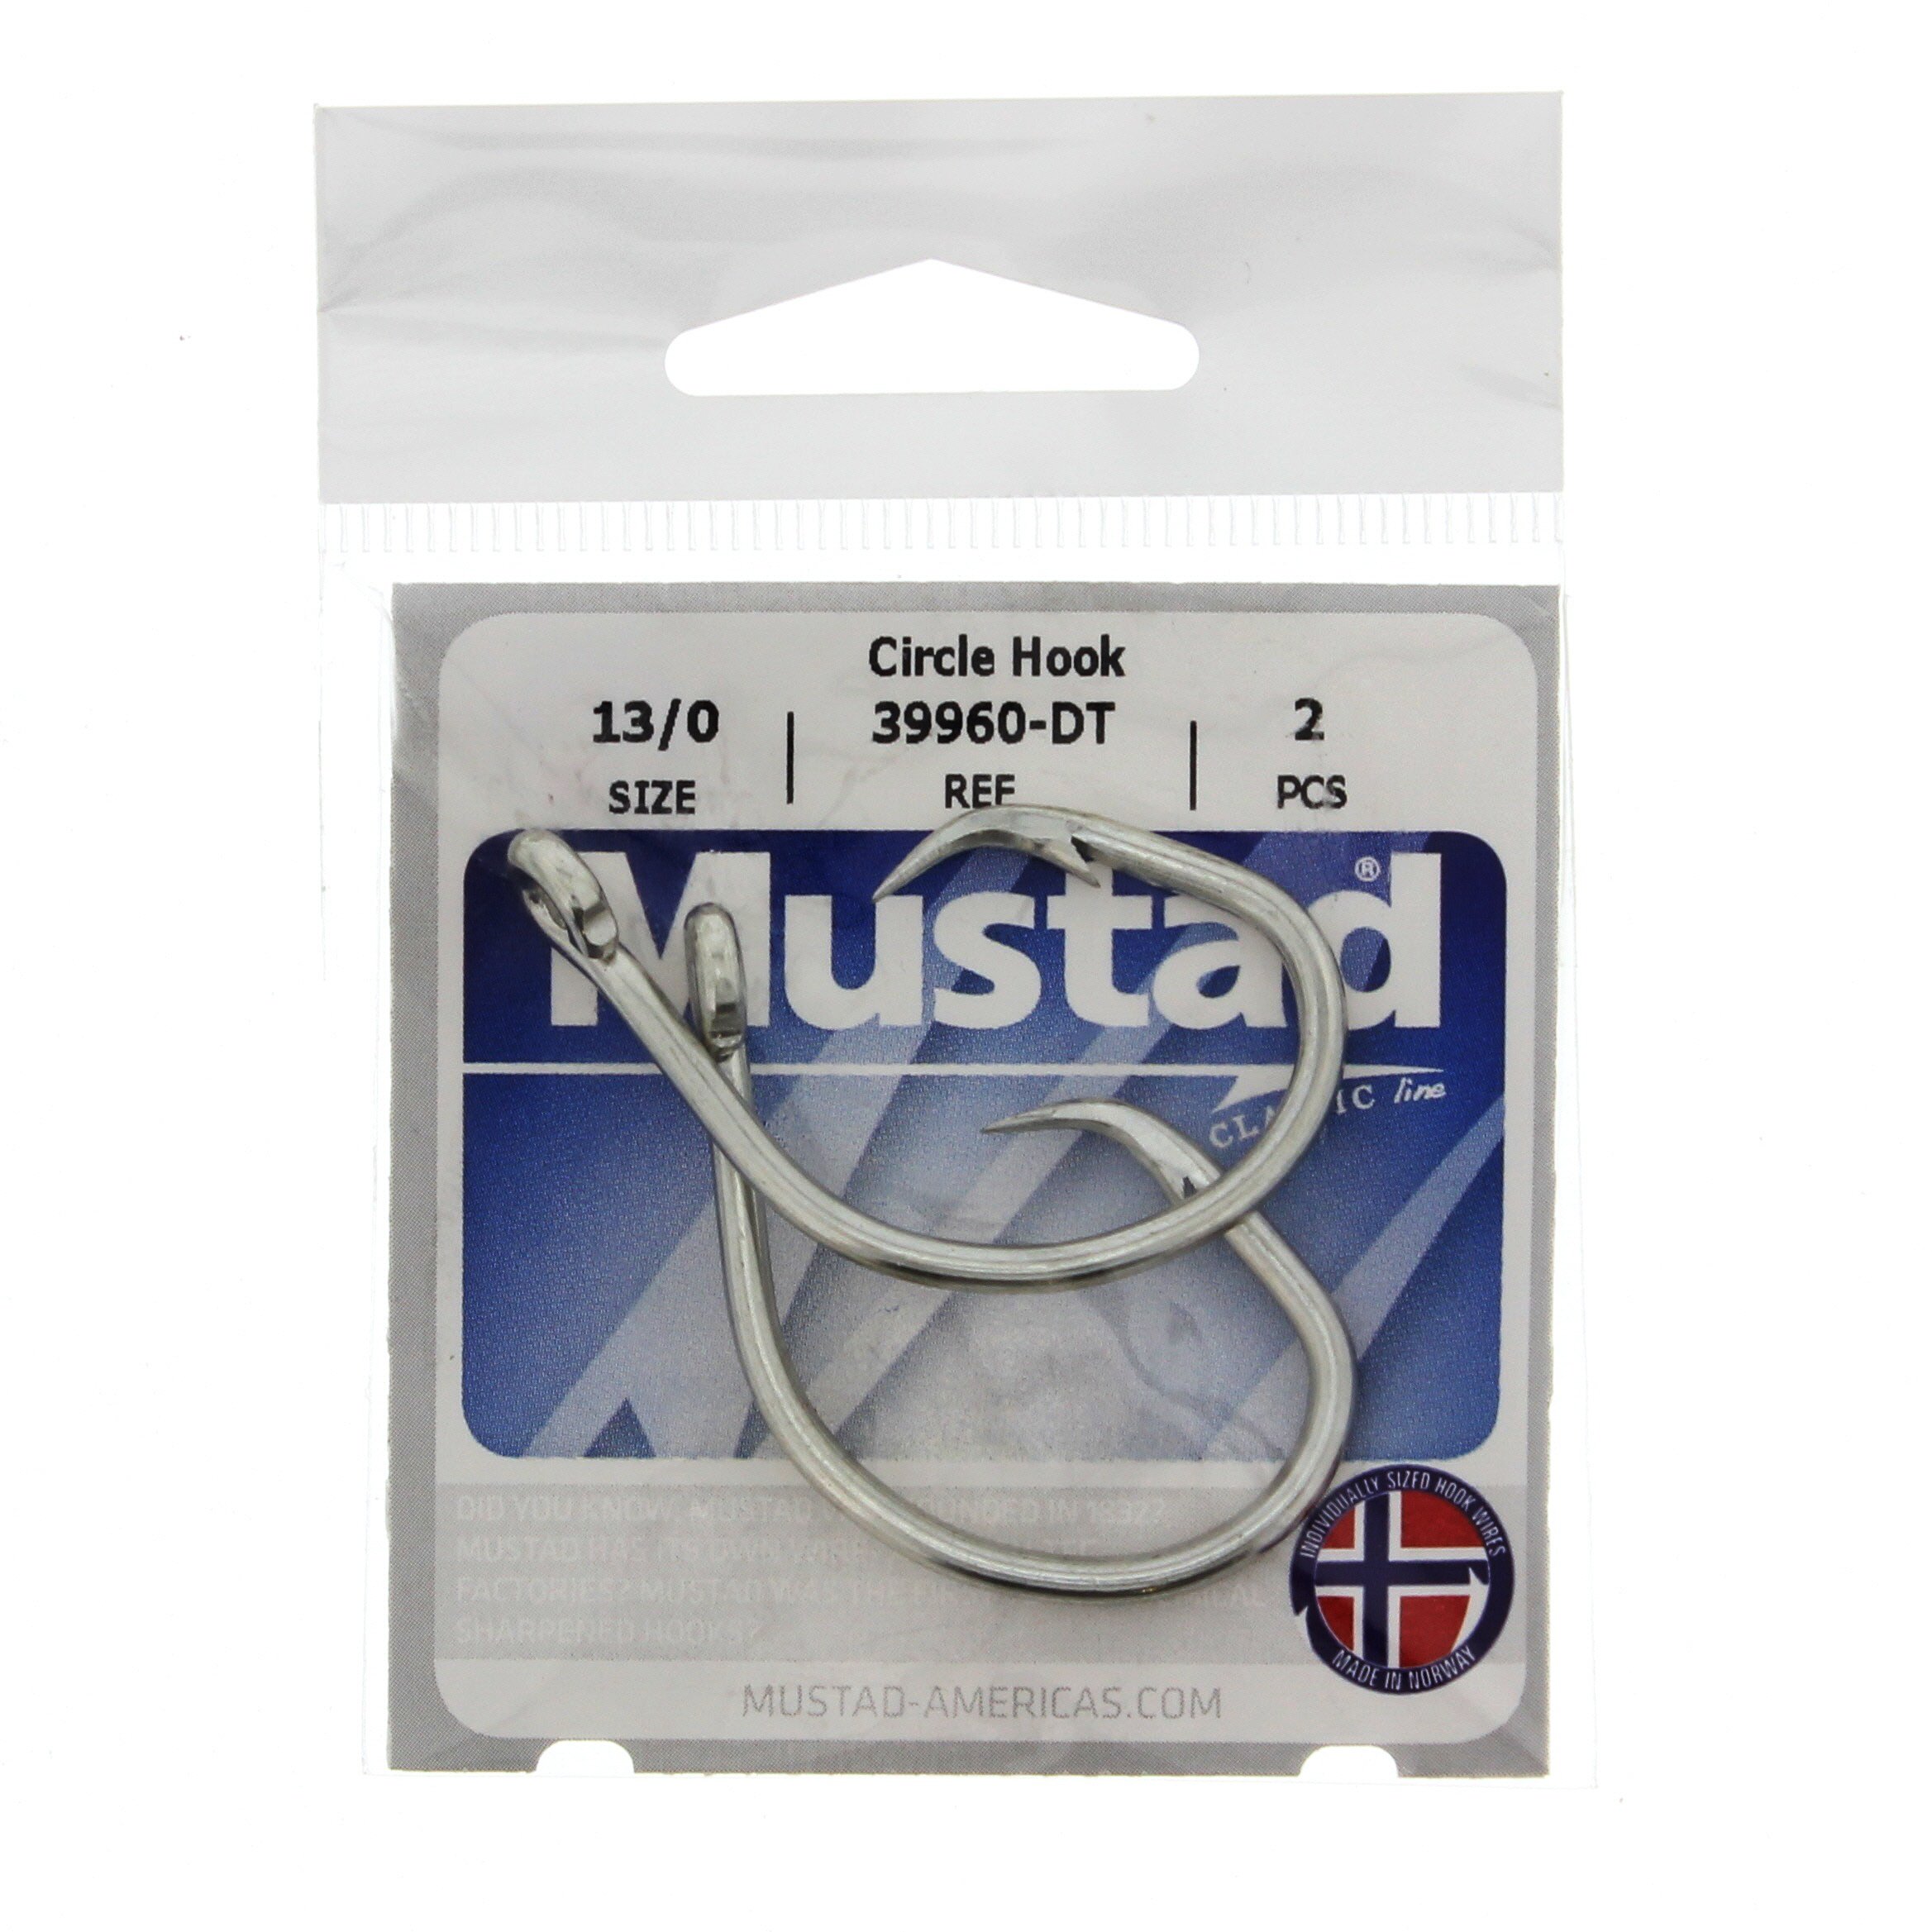 Mustad 39960-DT Circle Hook, Size 13/0